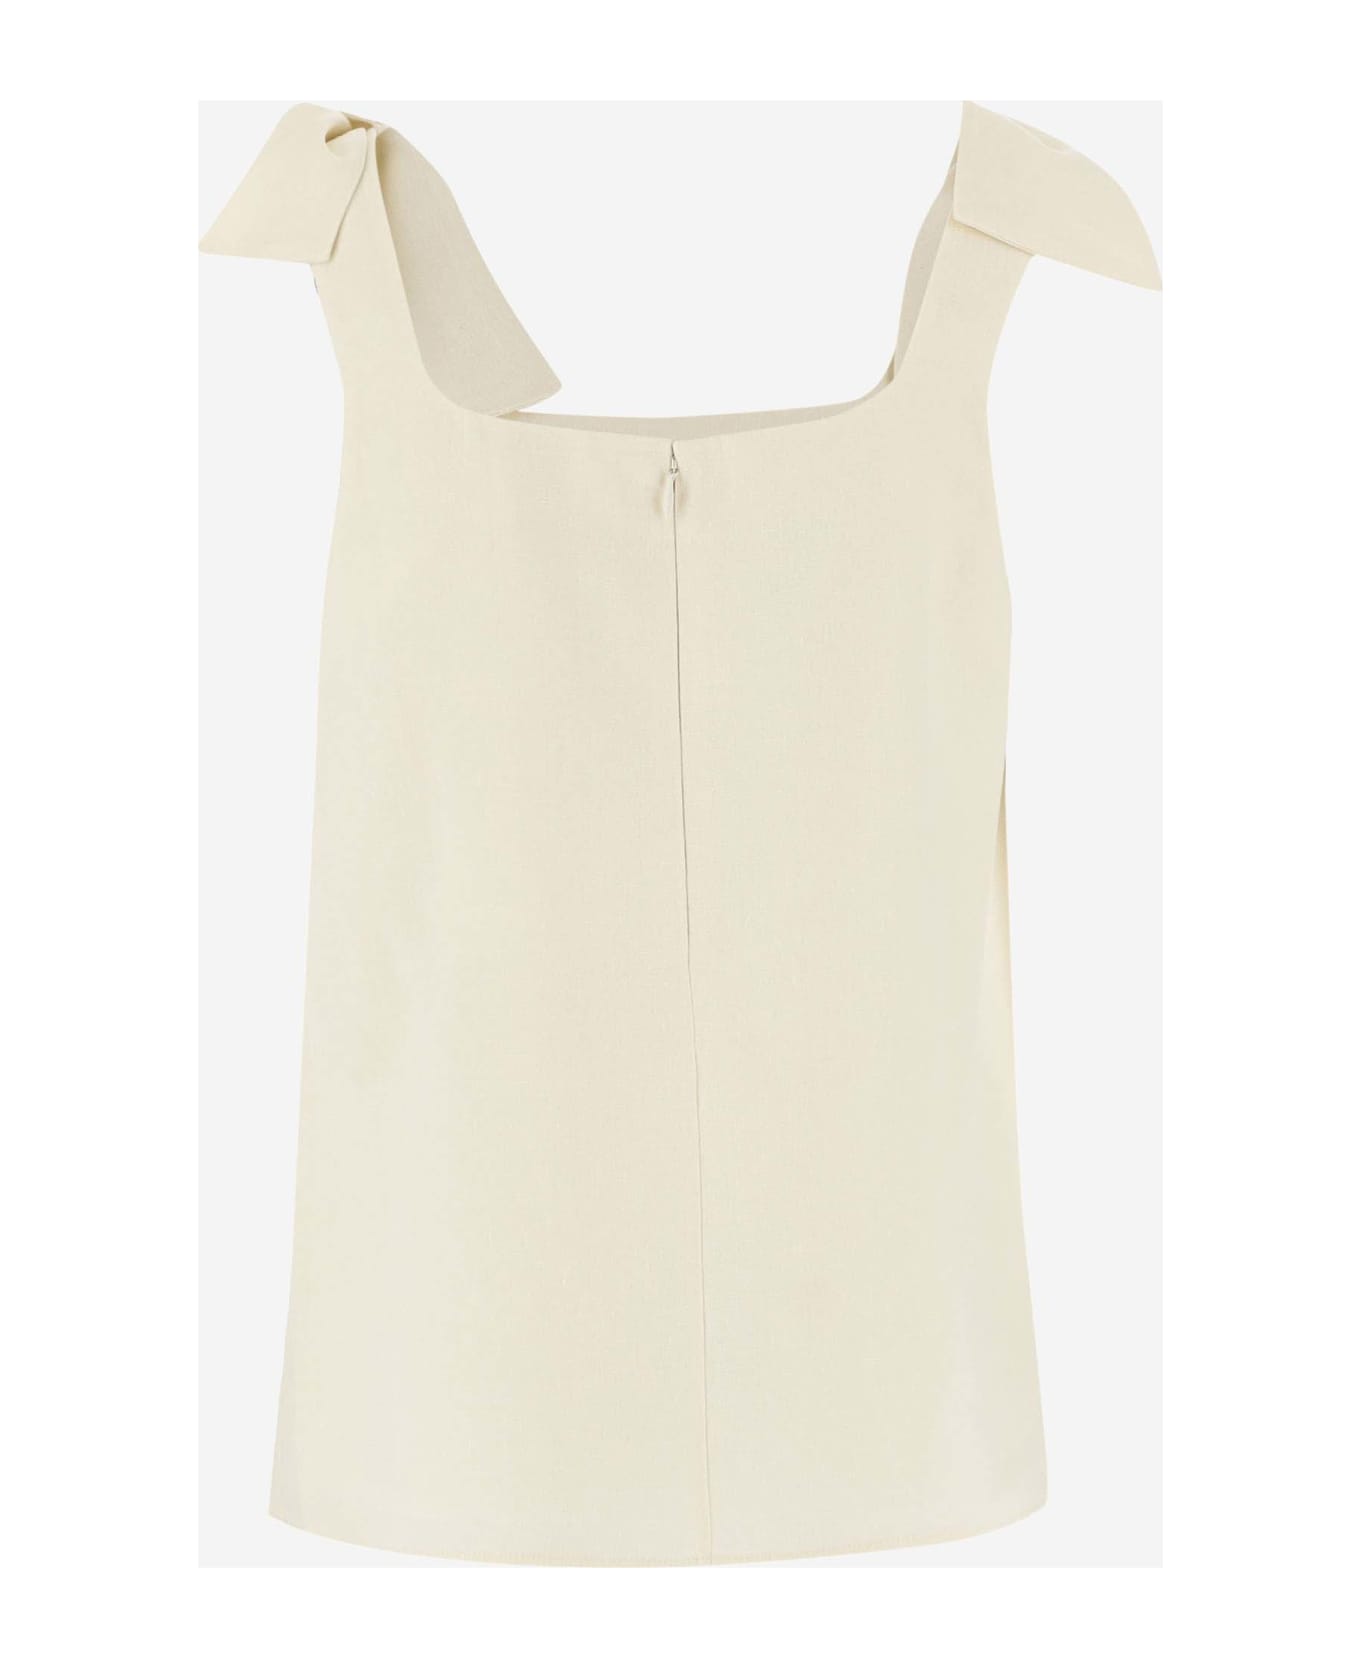 Chloé Tank Top With Bow On The Straps - White